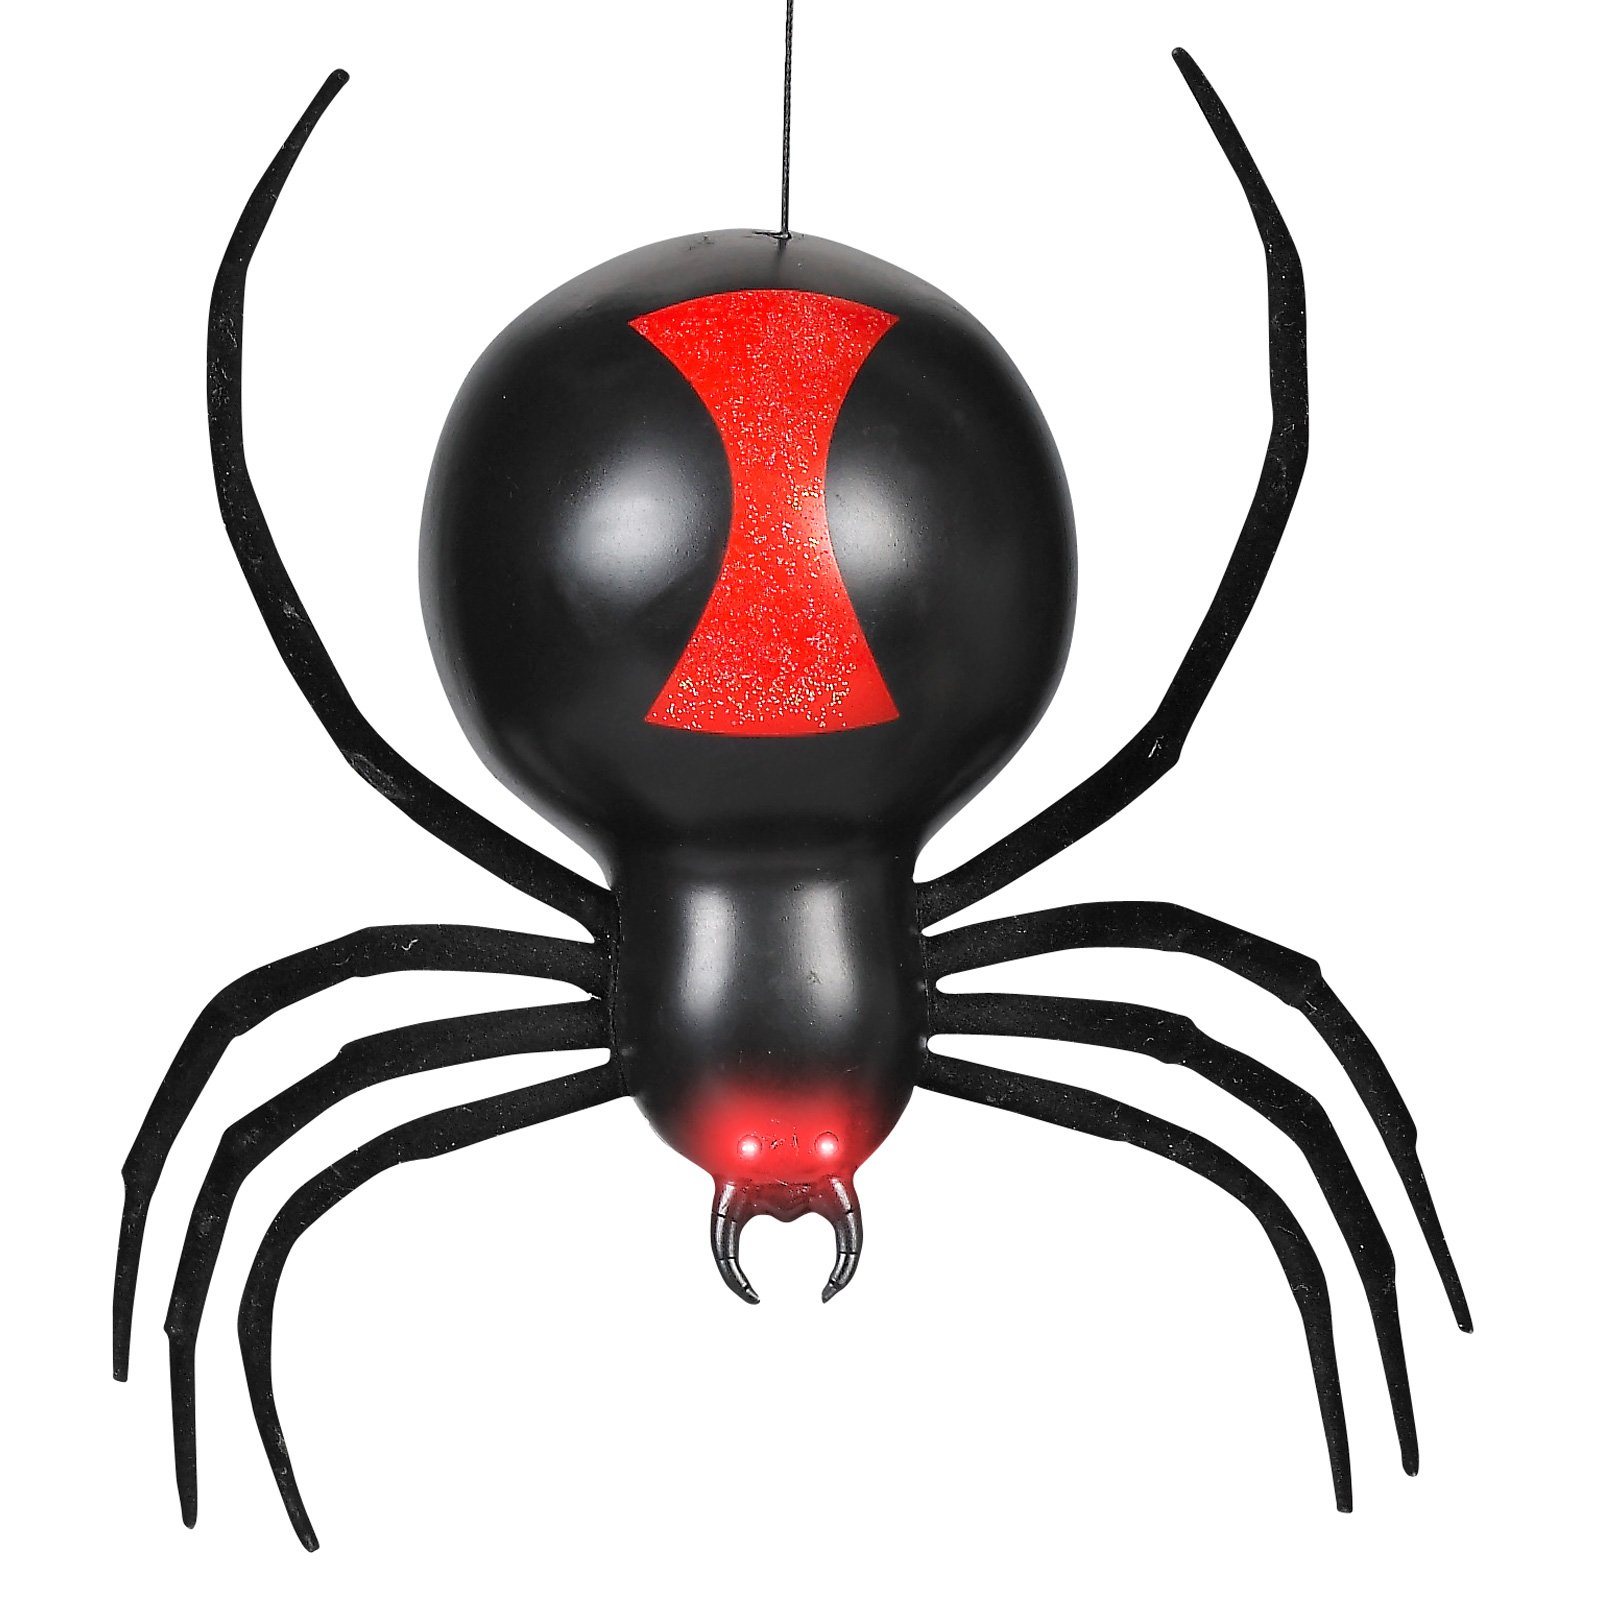 $16.16 Dropping Black Widow Spider Animated Prop at CostumesHut.